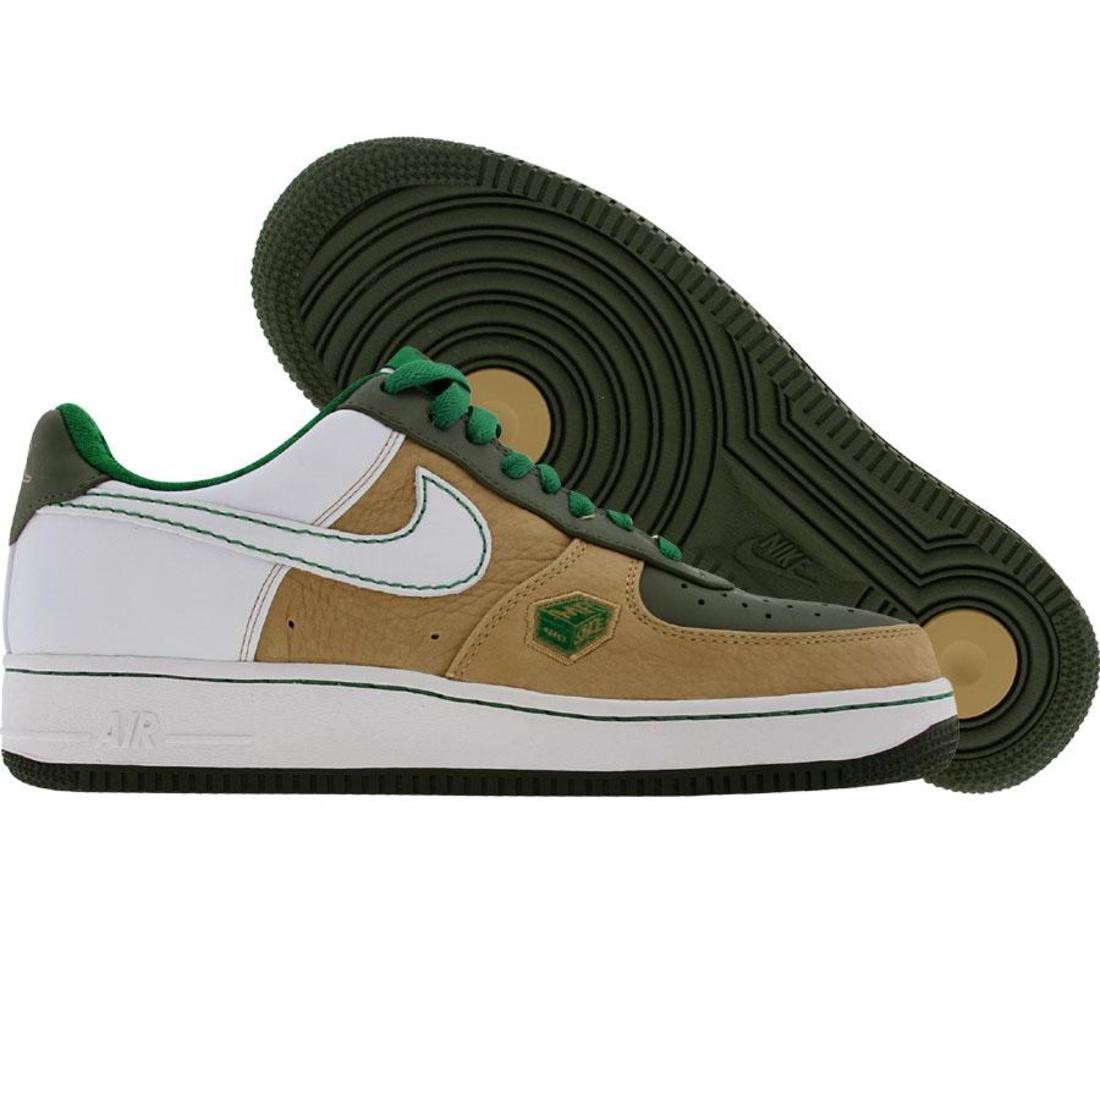 Nike Big Kids Air Force 1 07 Low Premium Baltimore Cities Series - Mr Shoe Edition (hay / white / army olive / pine green)